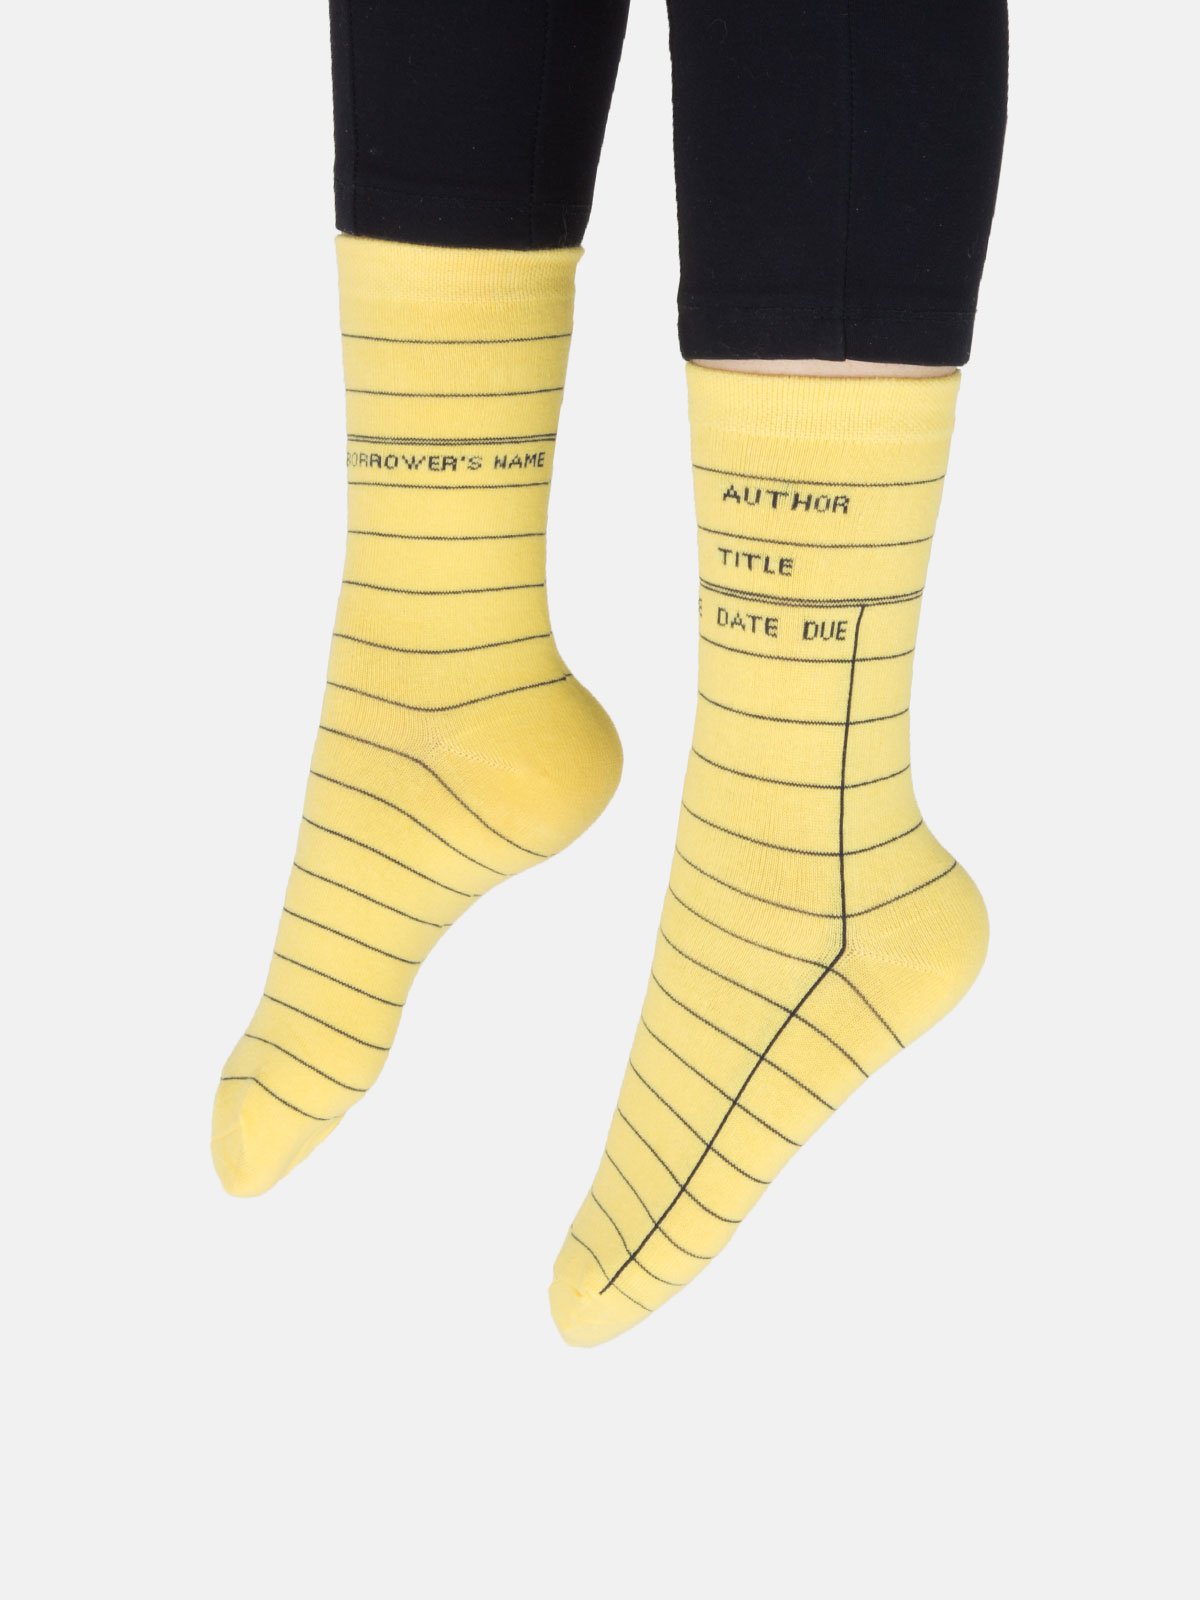 A model wearing yellow cotton unisex crew socks by the brand Out of Print feature the iconic library card design with the words 